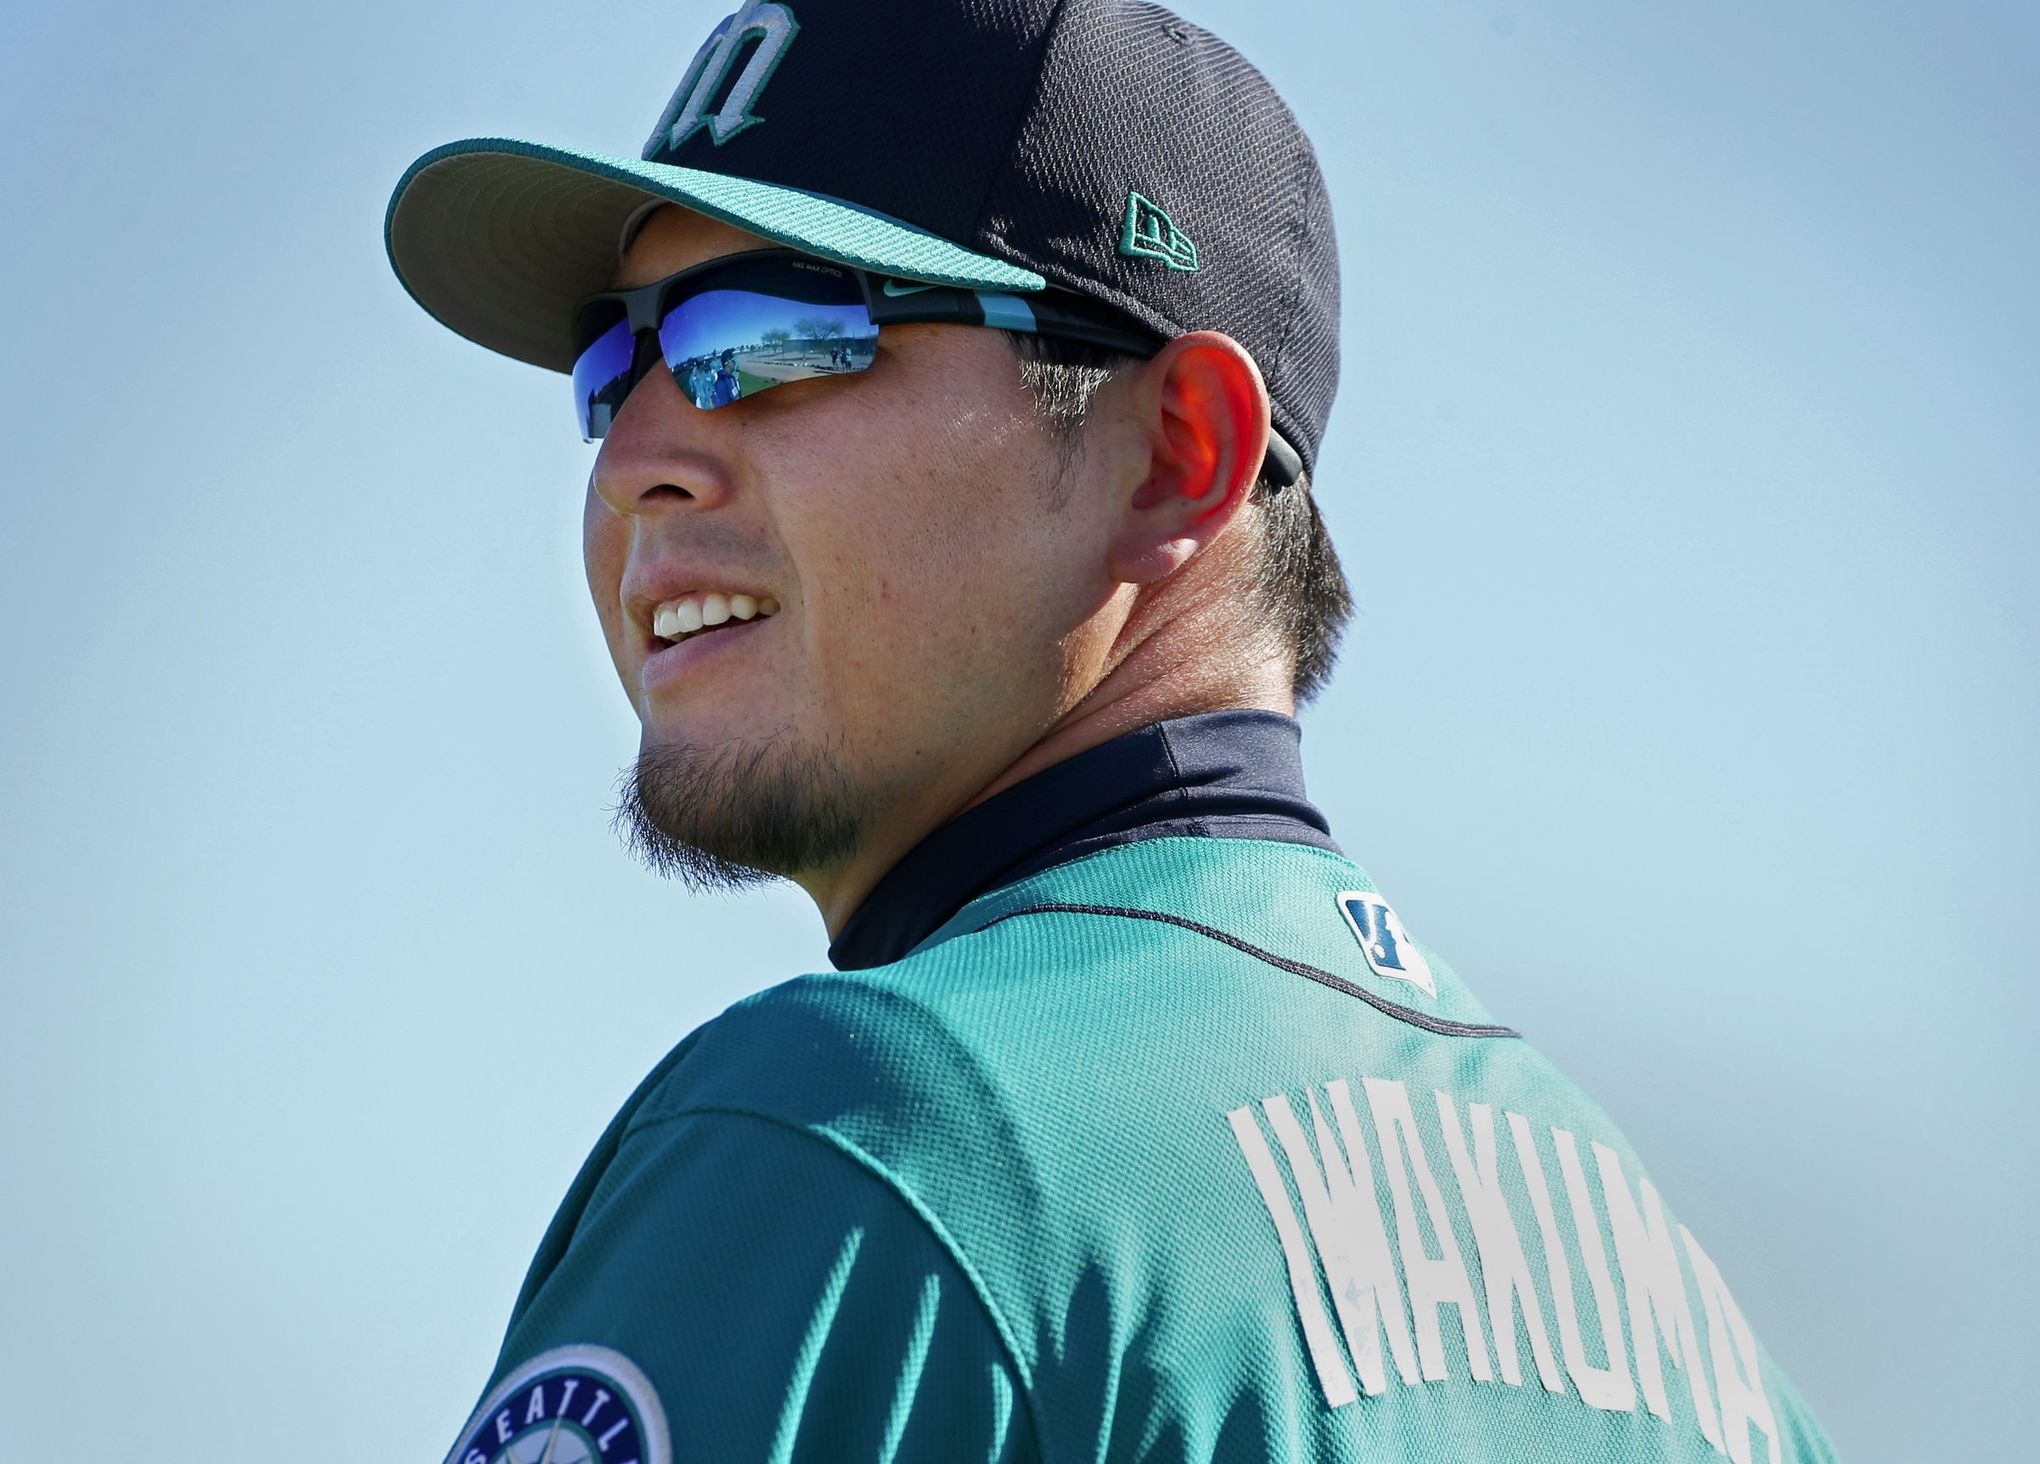 Mariners will activate Hisashi Iwakuma from the disabled list on